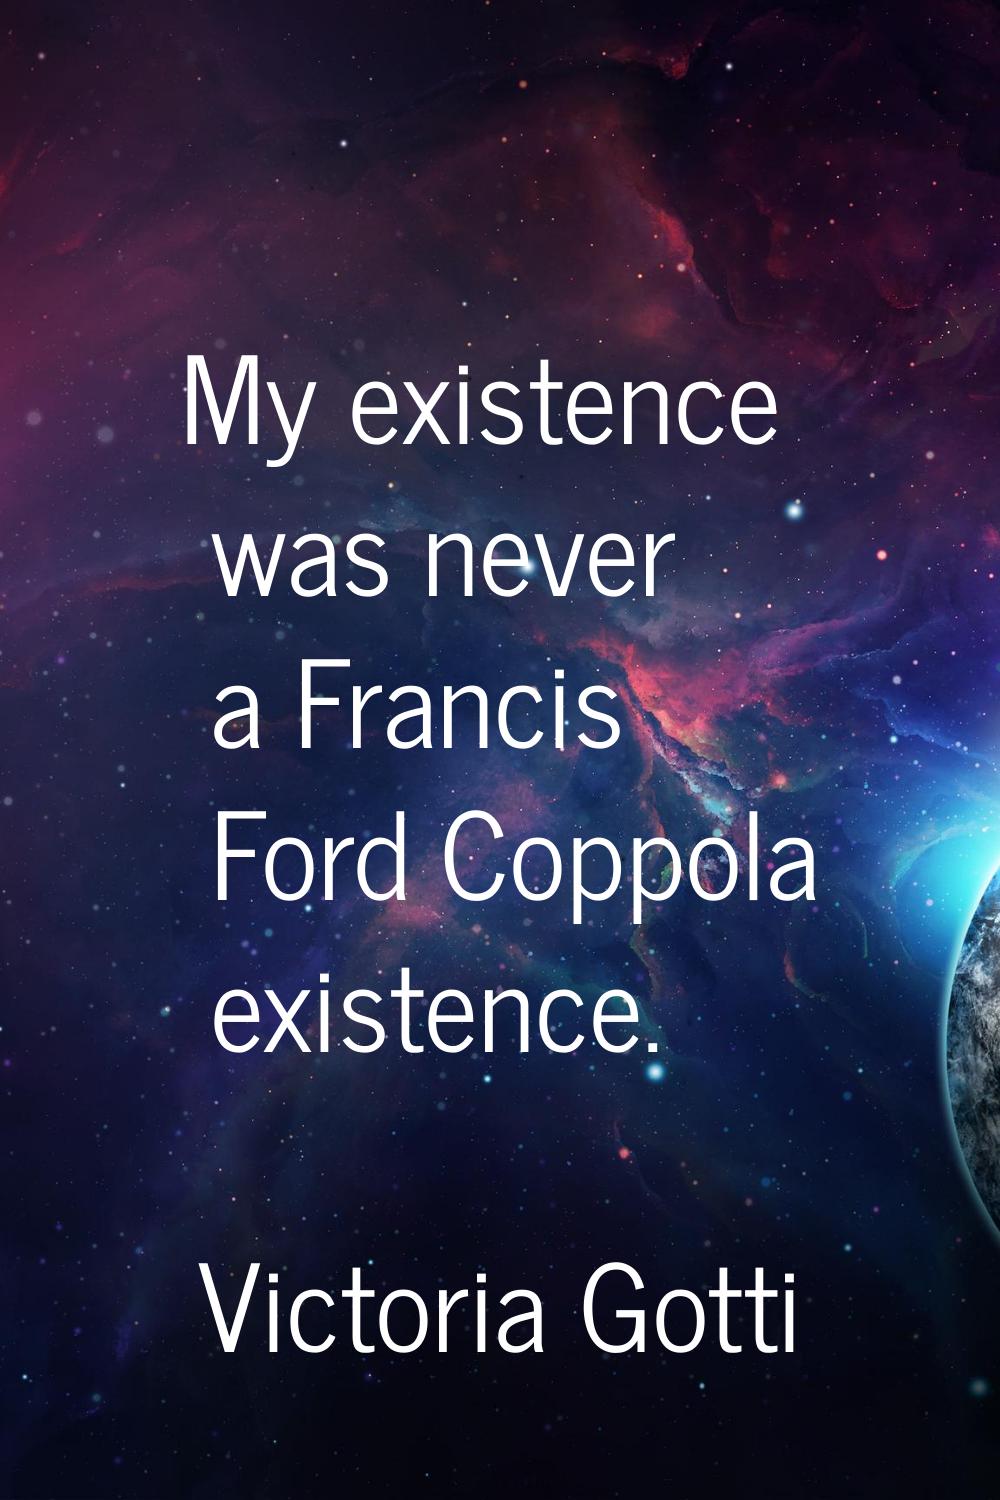 My existence was never a Francis Ford Coppola existence.